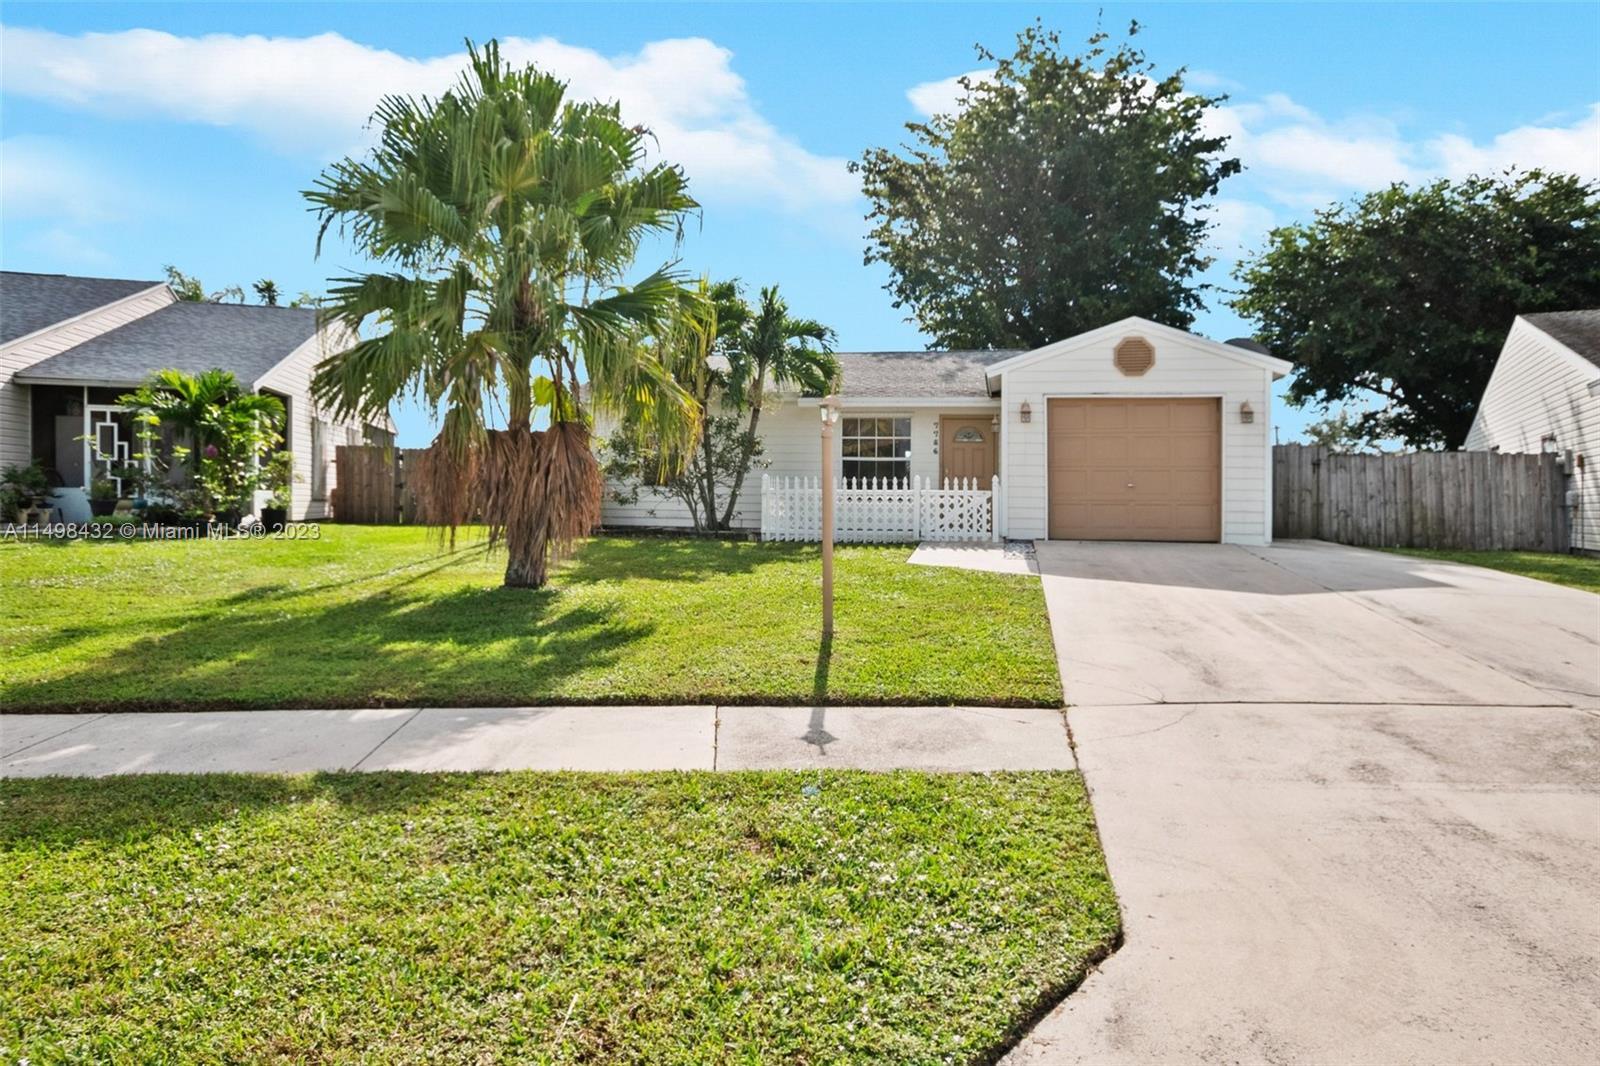 Welcome to your dream home in the Countrywood subdivision in Lake Worth! This meticulously updated 3